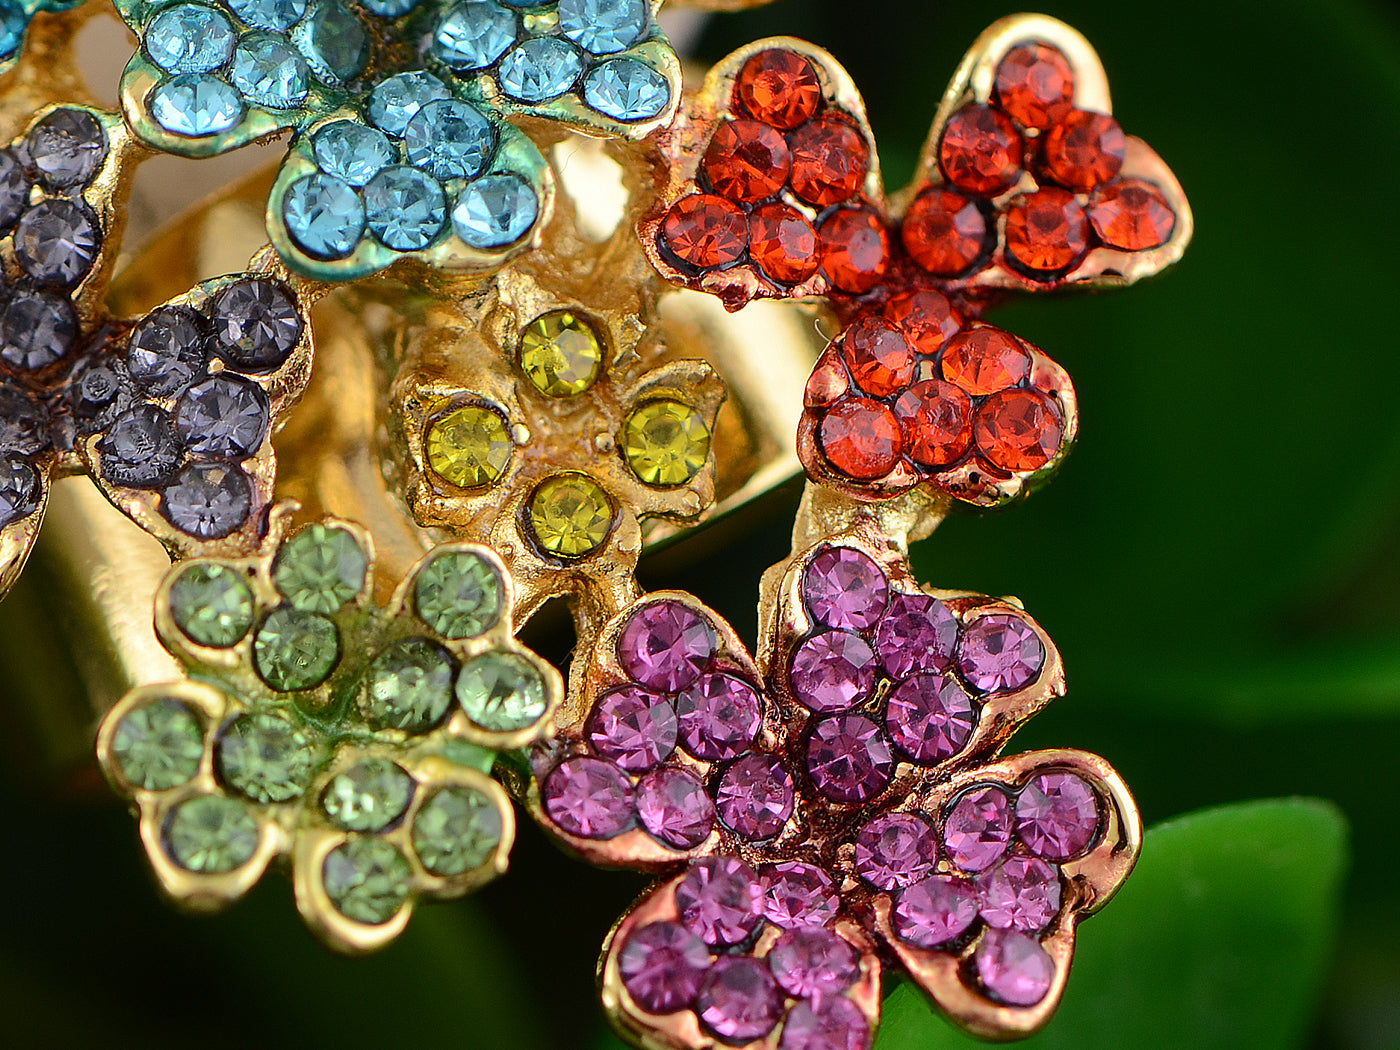 Rose Blue Multicolored Flower Statement Rings